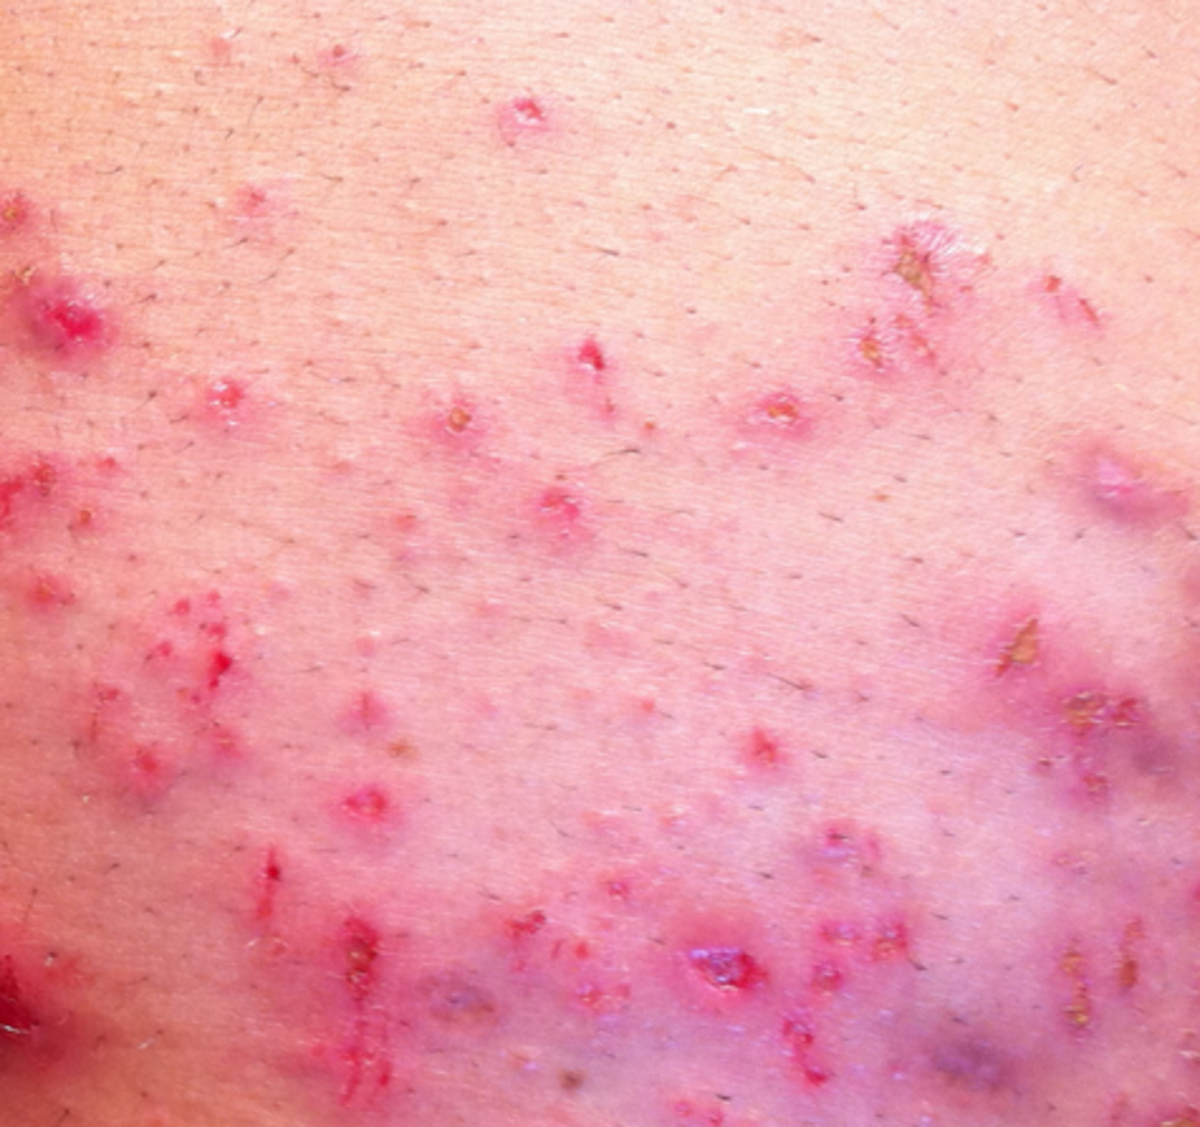 Morgellons Disease – Pictures, Symptoms, Causes, Treatment | HubPages